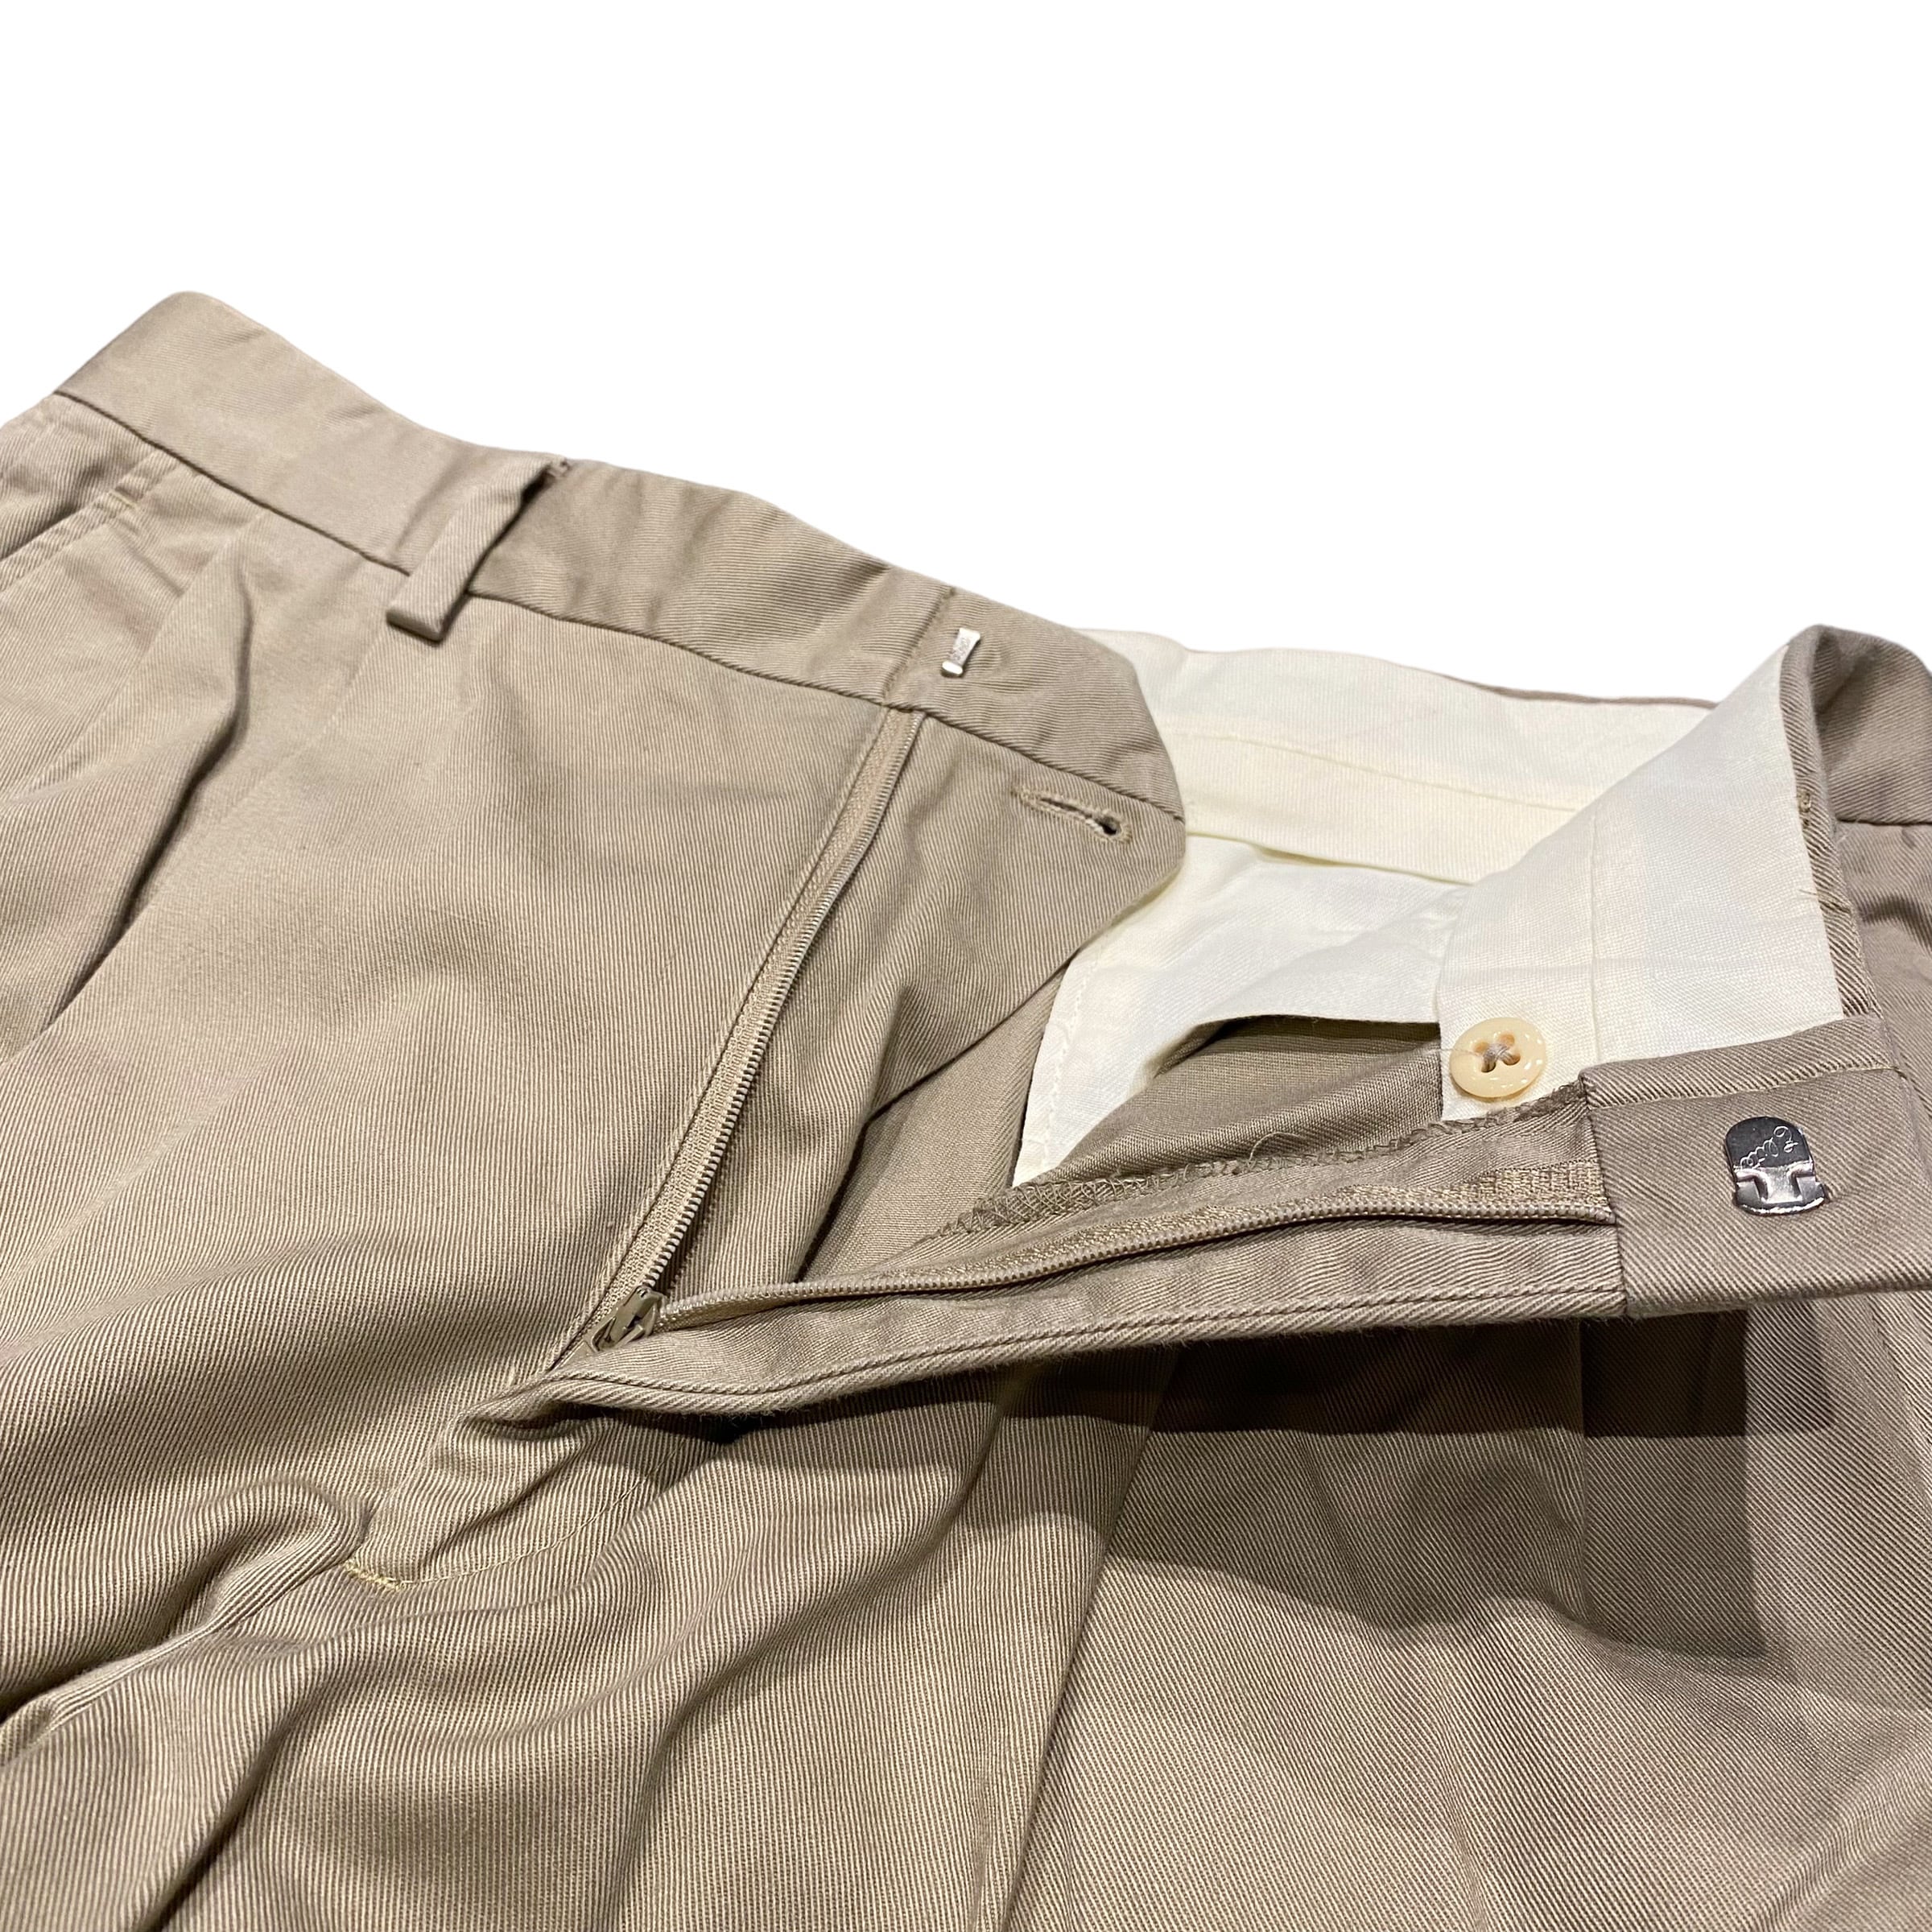 90's USA製 Brooks Brothers 2tuck Chino Trouser Pants W33 